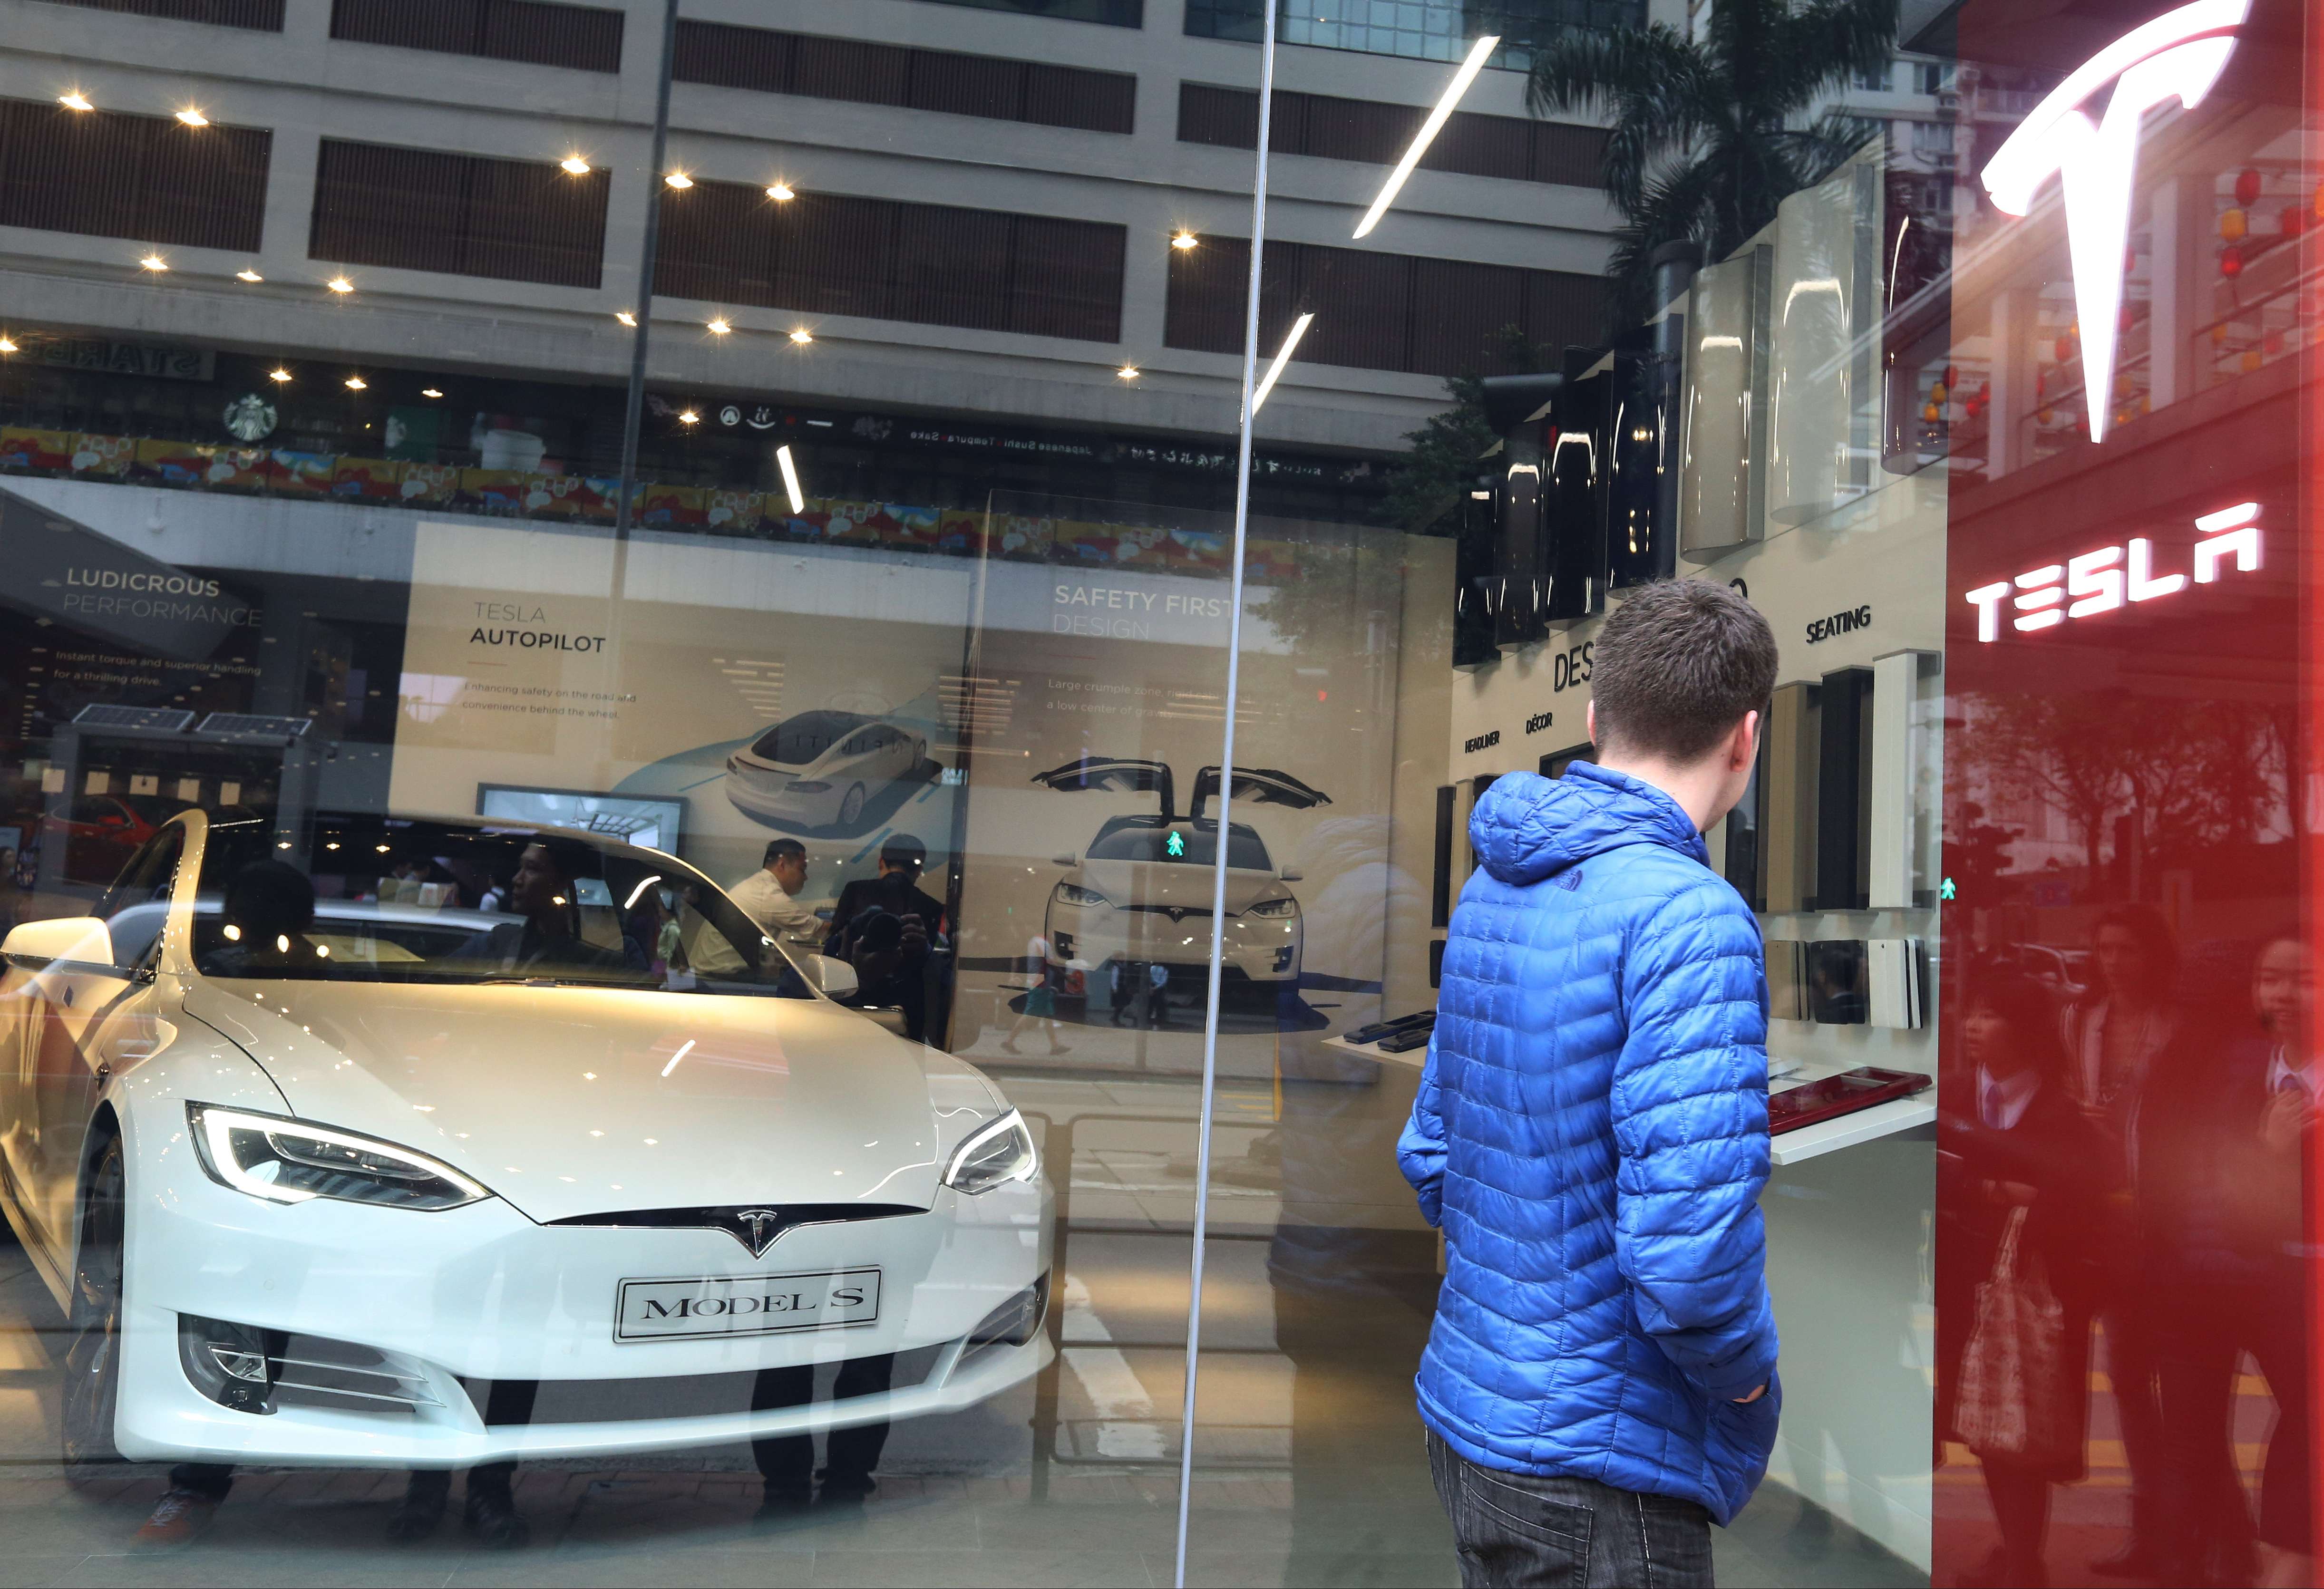 The Hong Kong government has reduced its tax waivers for e-cars. Photo: Dickson Lee